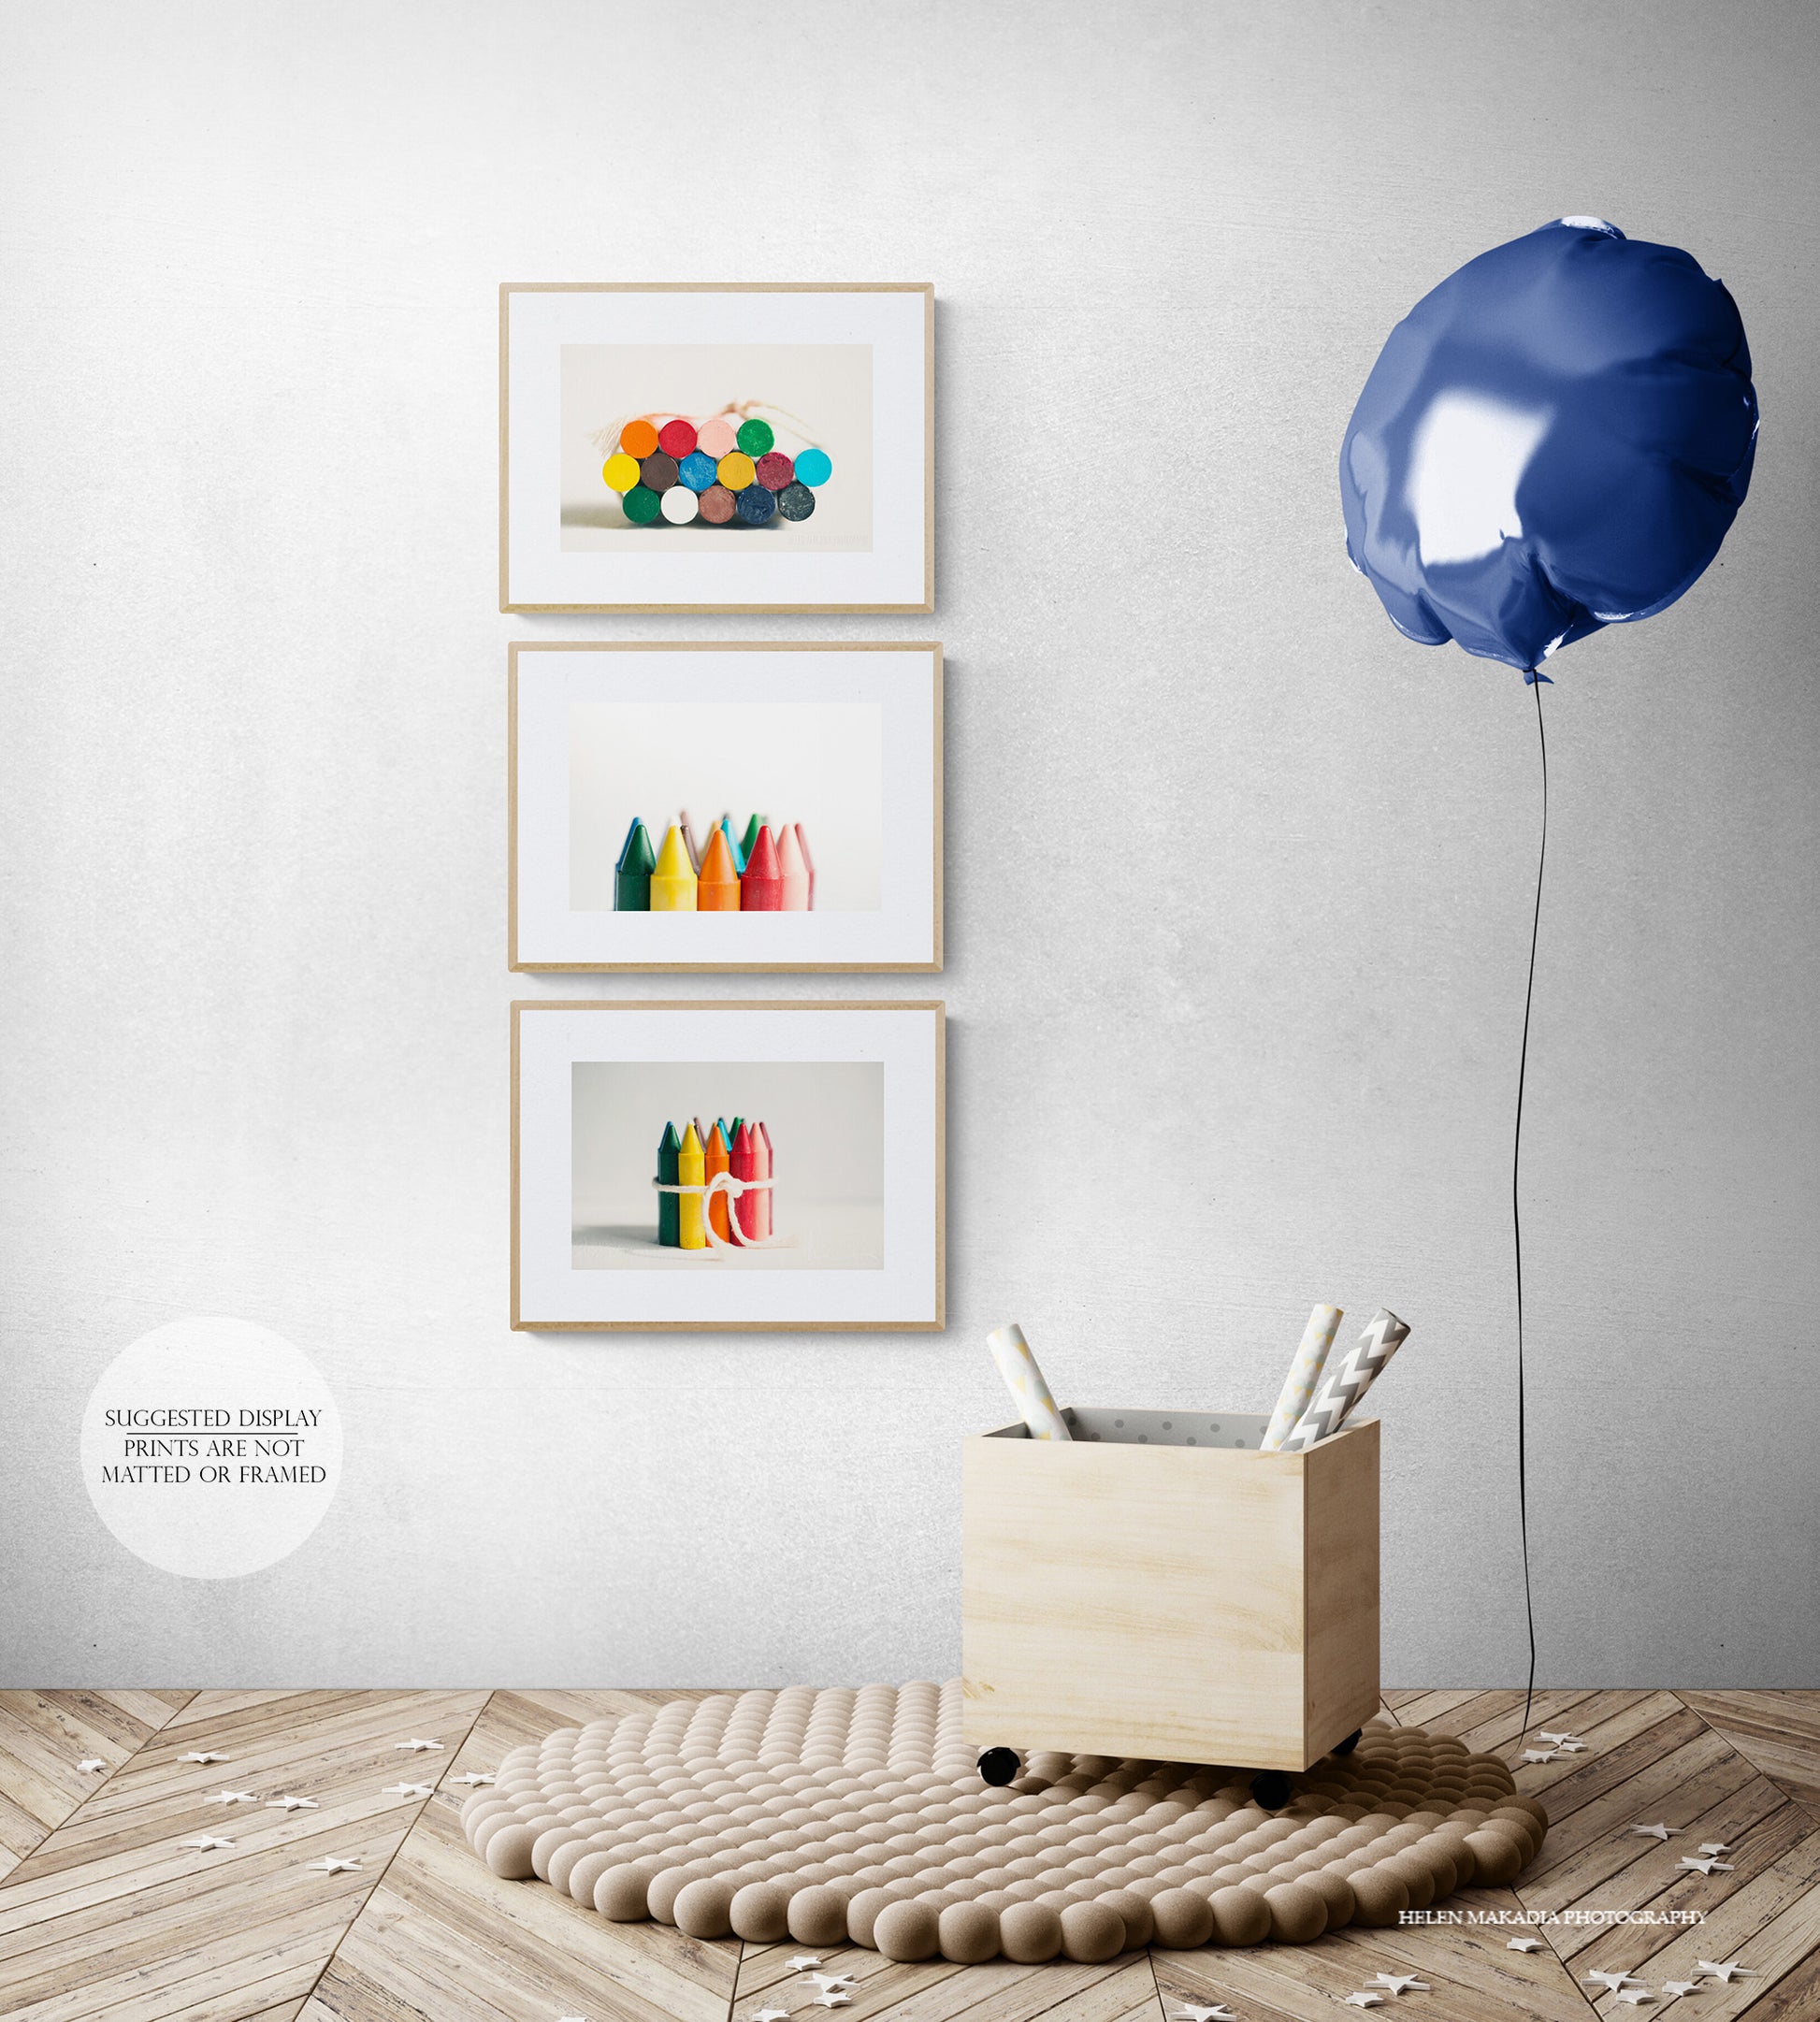 Three Framed Photograph Prints of Crayons in a Playroom as Wall Art